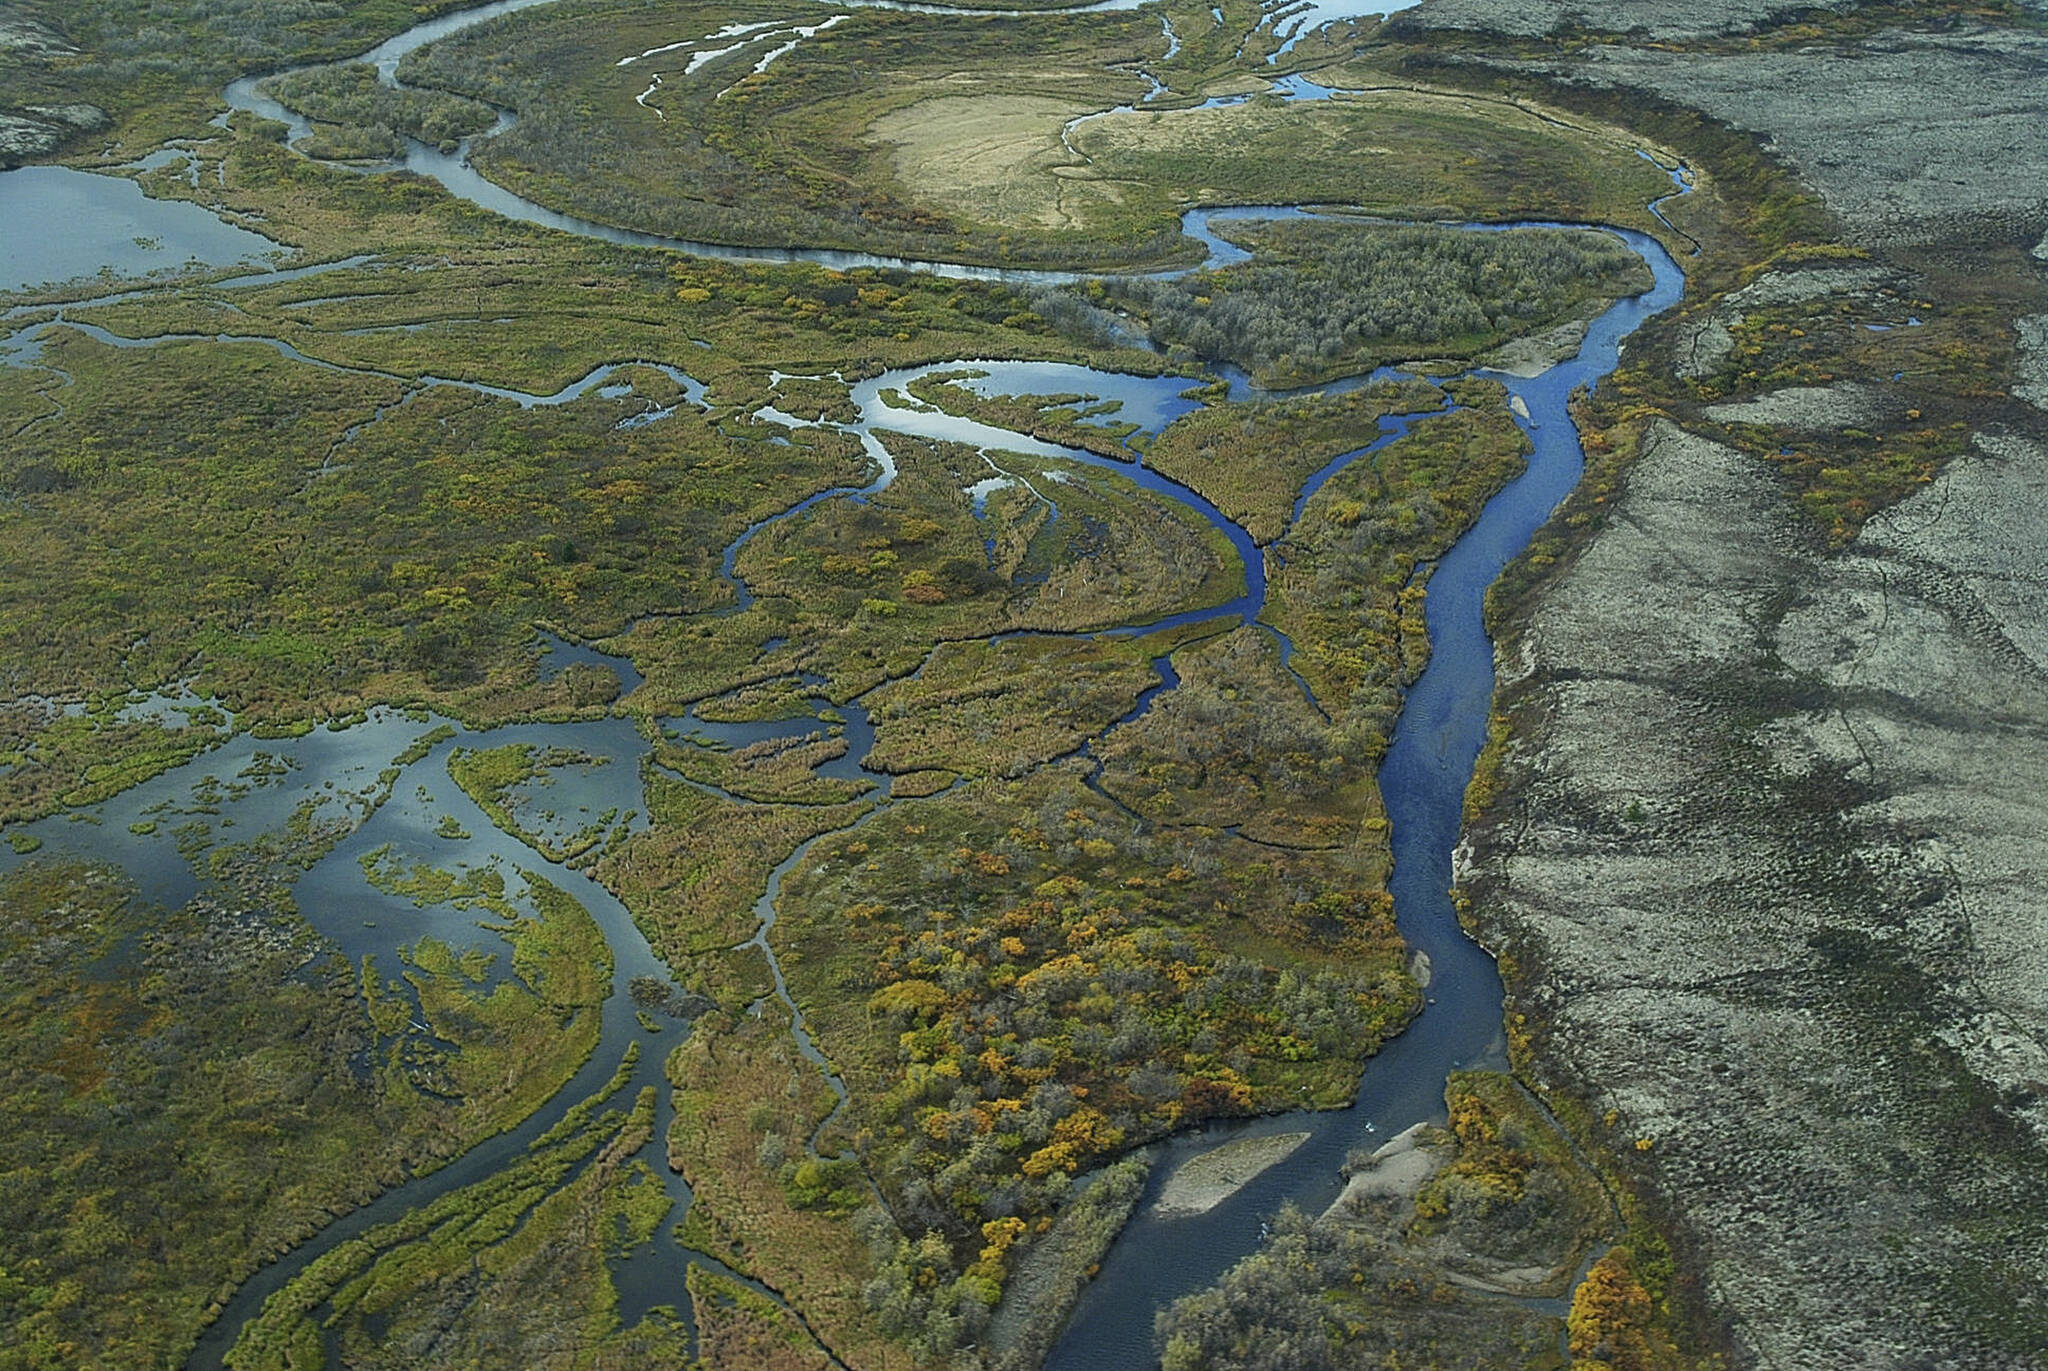 This September 2011 aerial photo provided by the Environmental Protection Agency, shows the Bristol Bay watershed in Alaska. The U.S. Environmental Protection Agency on Tuesday, Jan. 31, 2023, effectively vetoed a proposed copper and gold mine in the remote region of southwest Alaska that is coveted by mining interests but that also supports the world’s largest sockeye salmon fishery. (Joseph Ebersole/EPA via AP)